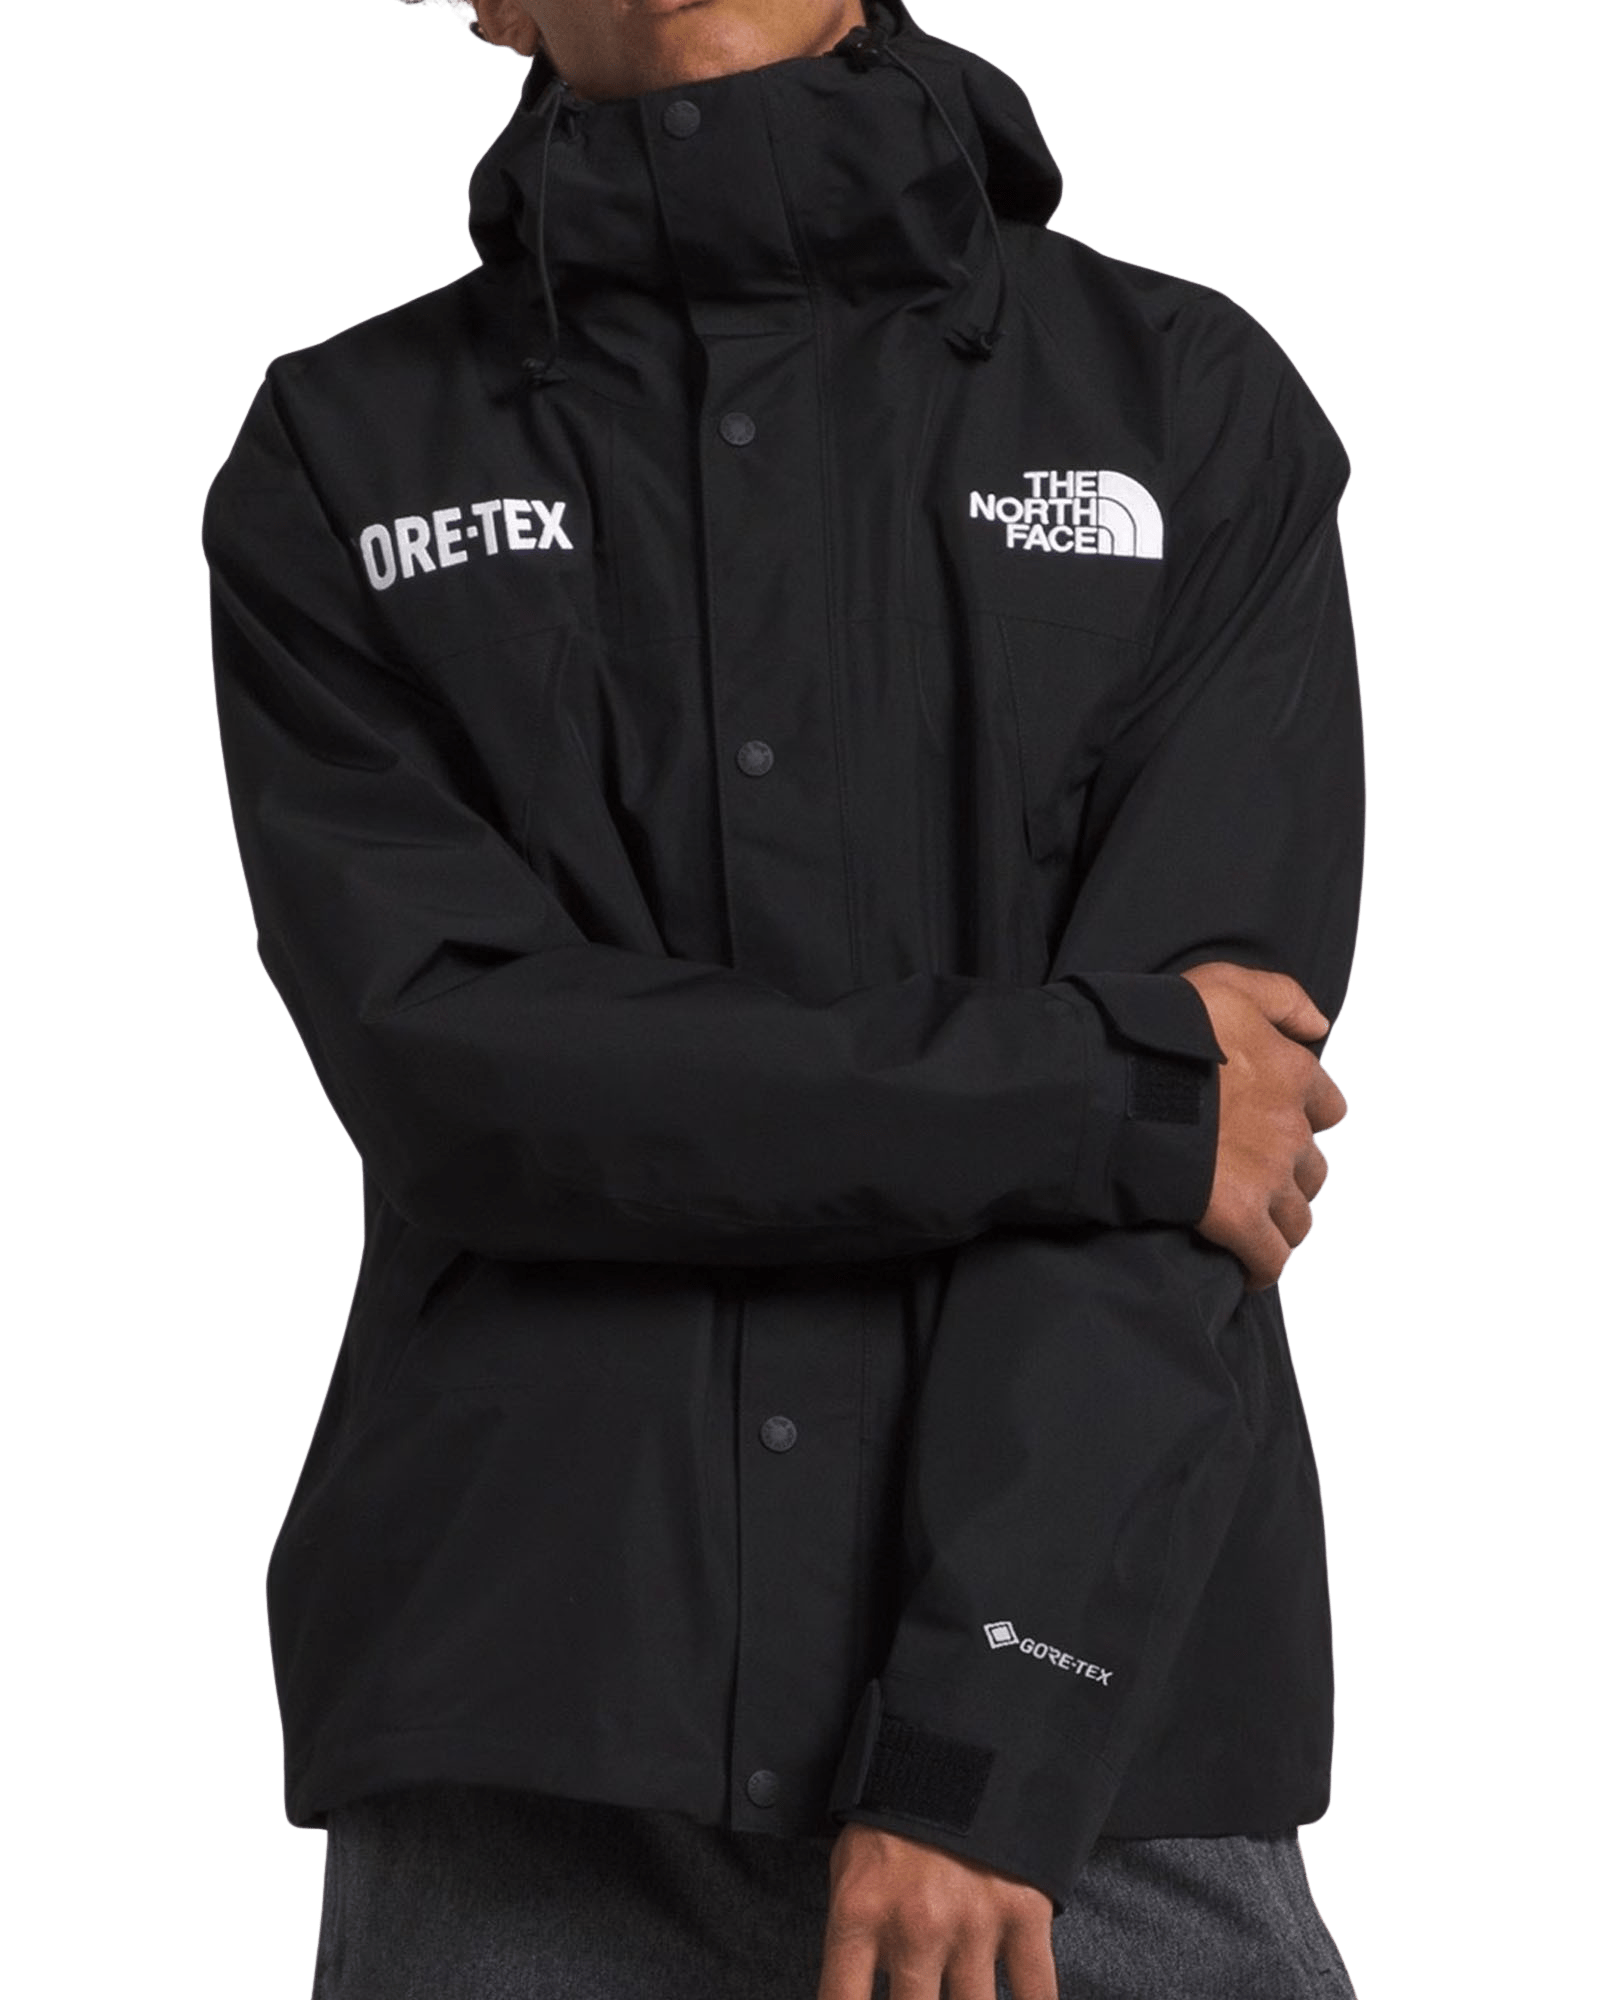 The North Face Alpine Project GORE-TEX Jacket (Men's)